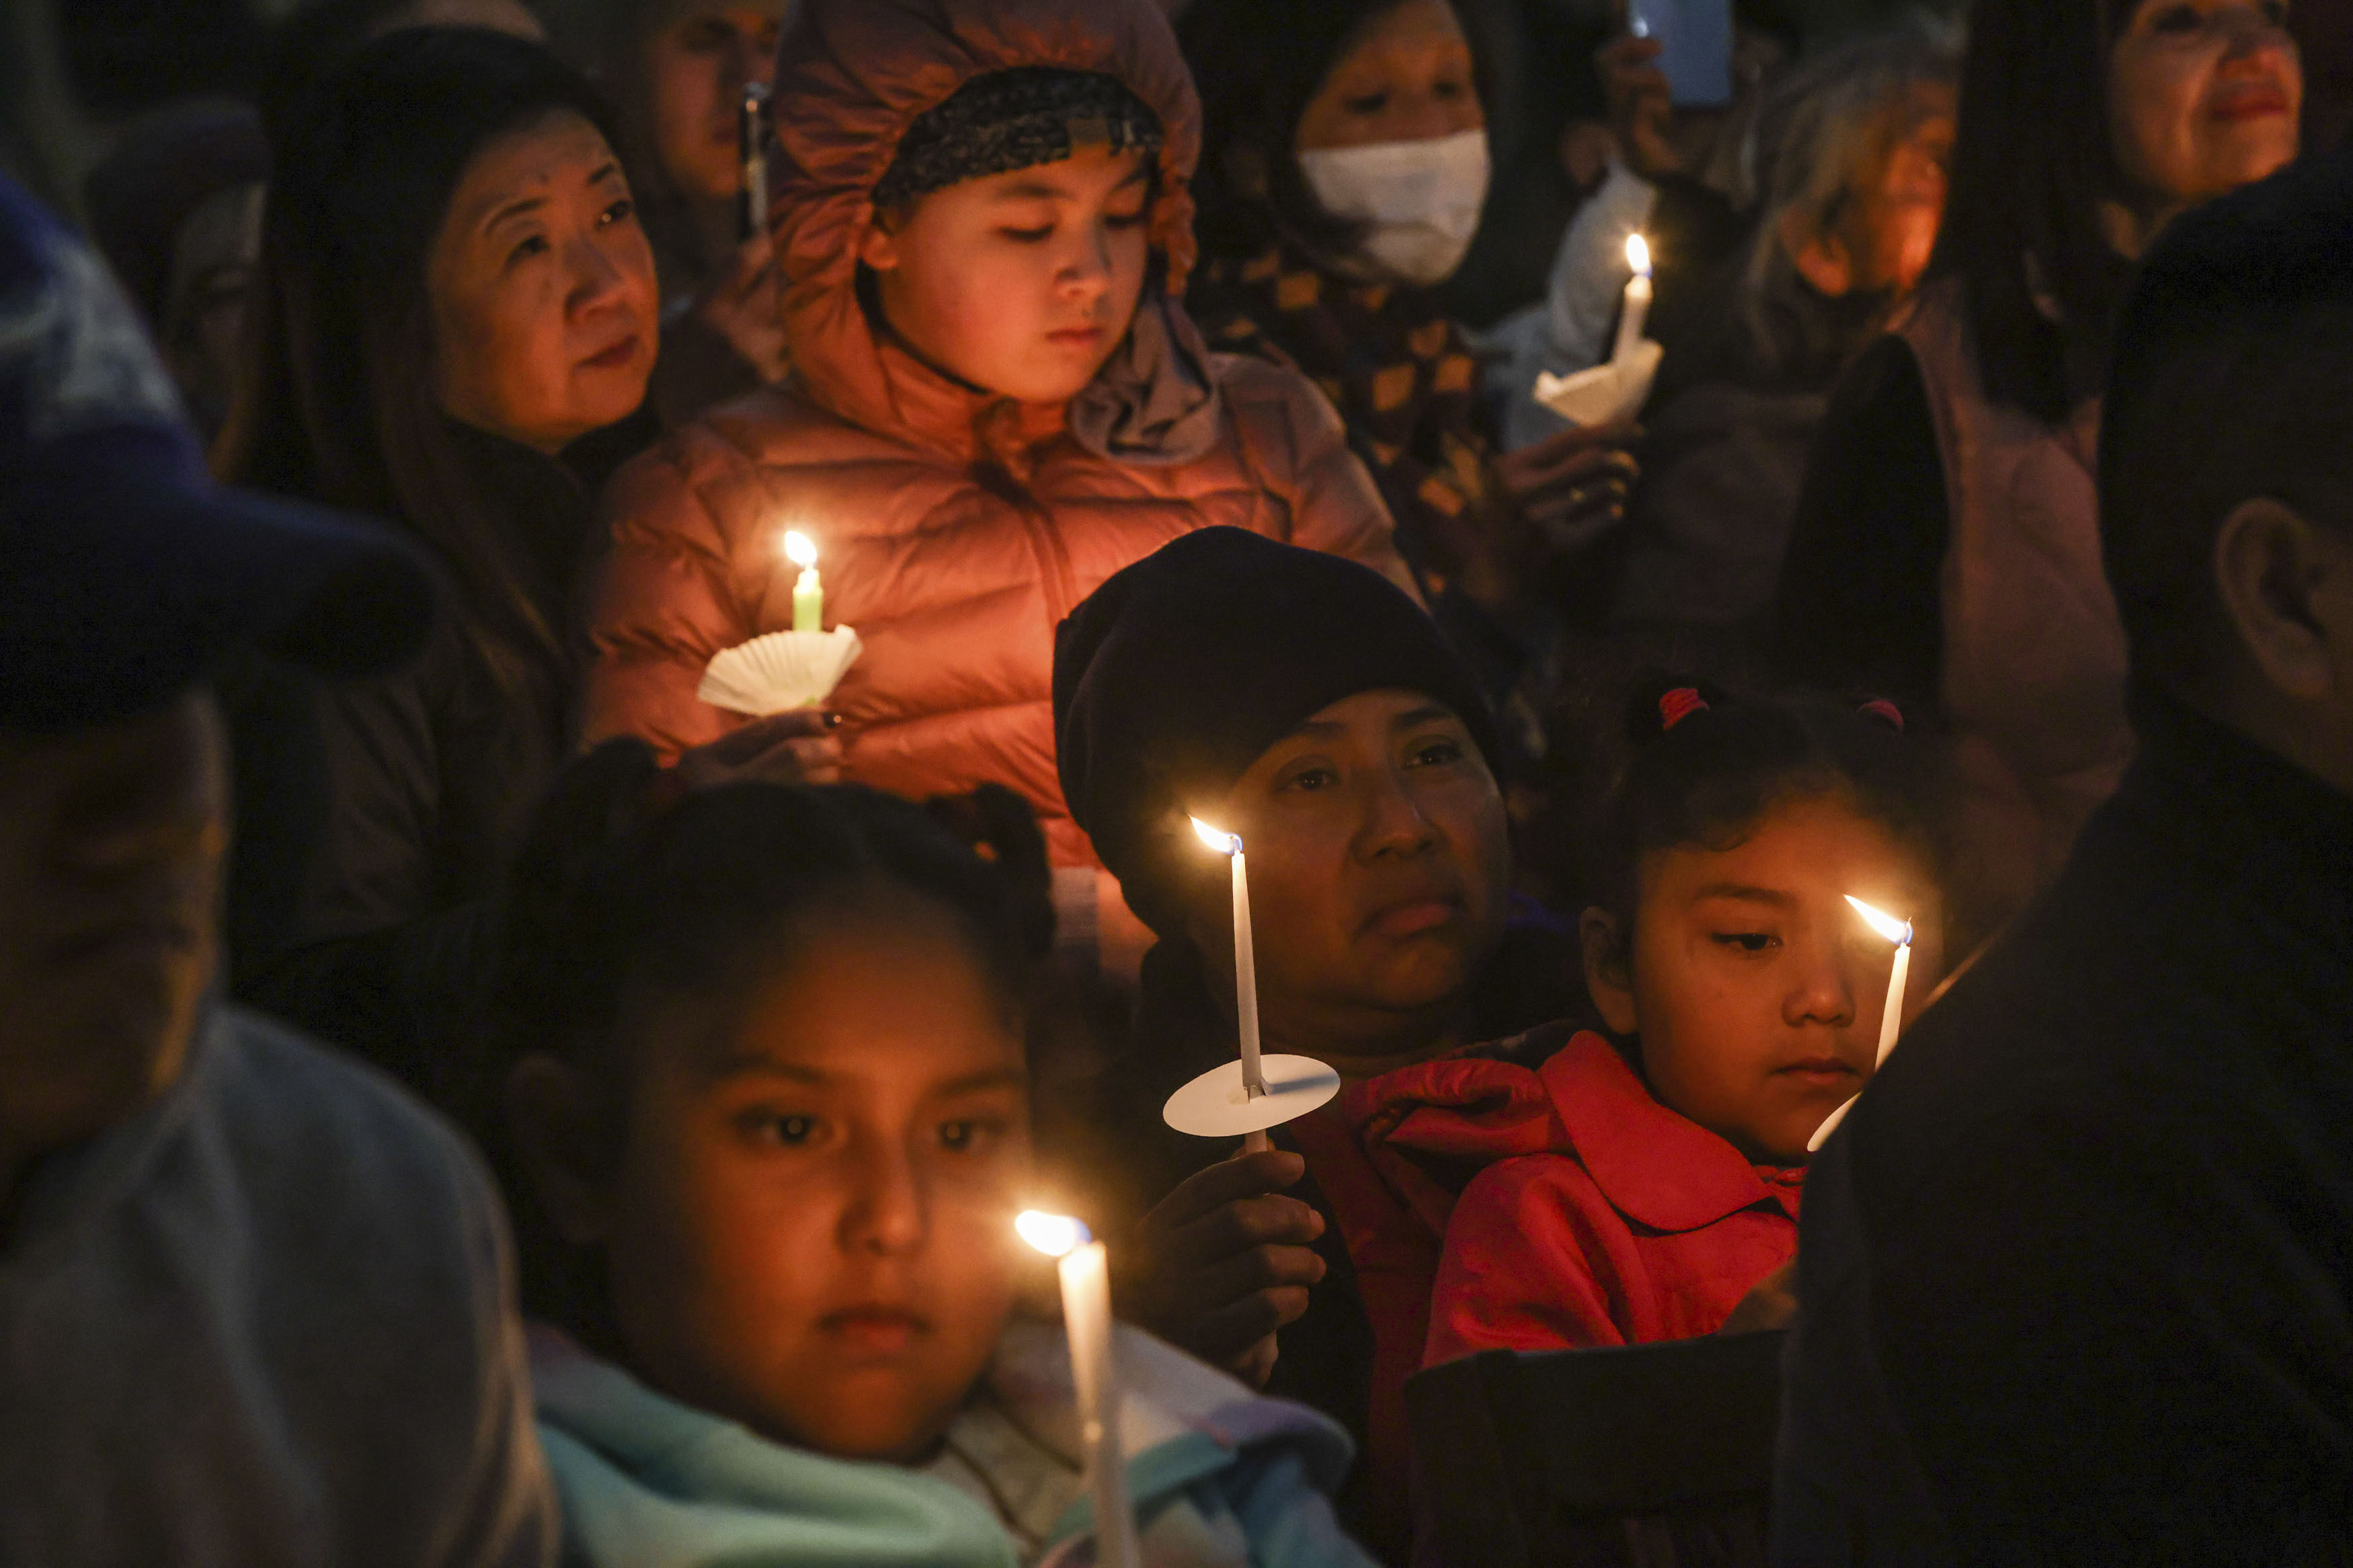 People gather at a vigil in Half Moon Bay, California, on January 27, days after a mass shooting took place at two farms in the community. Photo: San Francisco Chronicle via AP